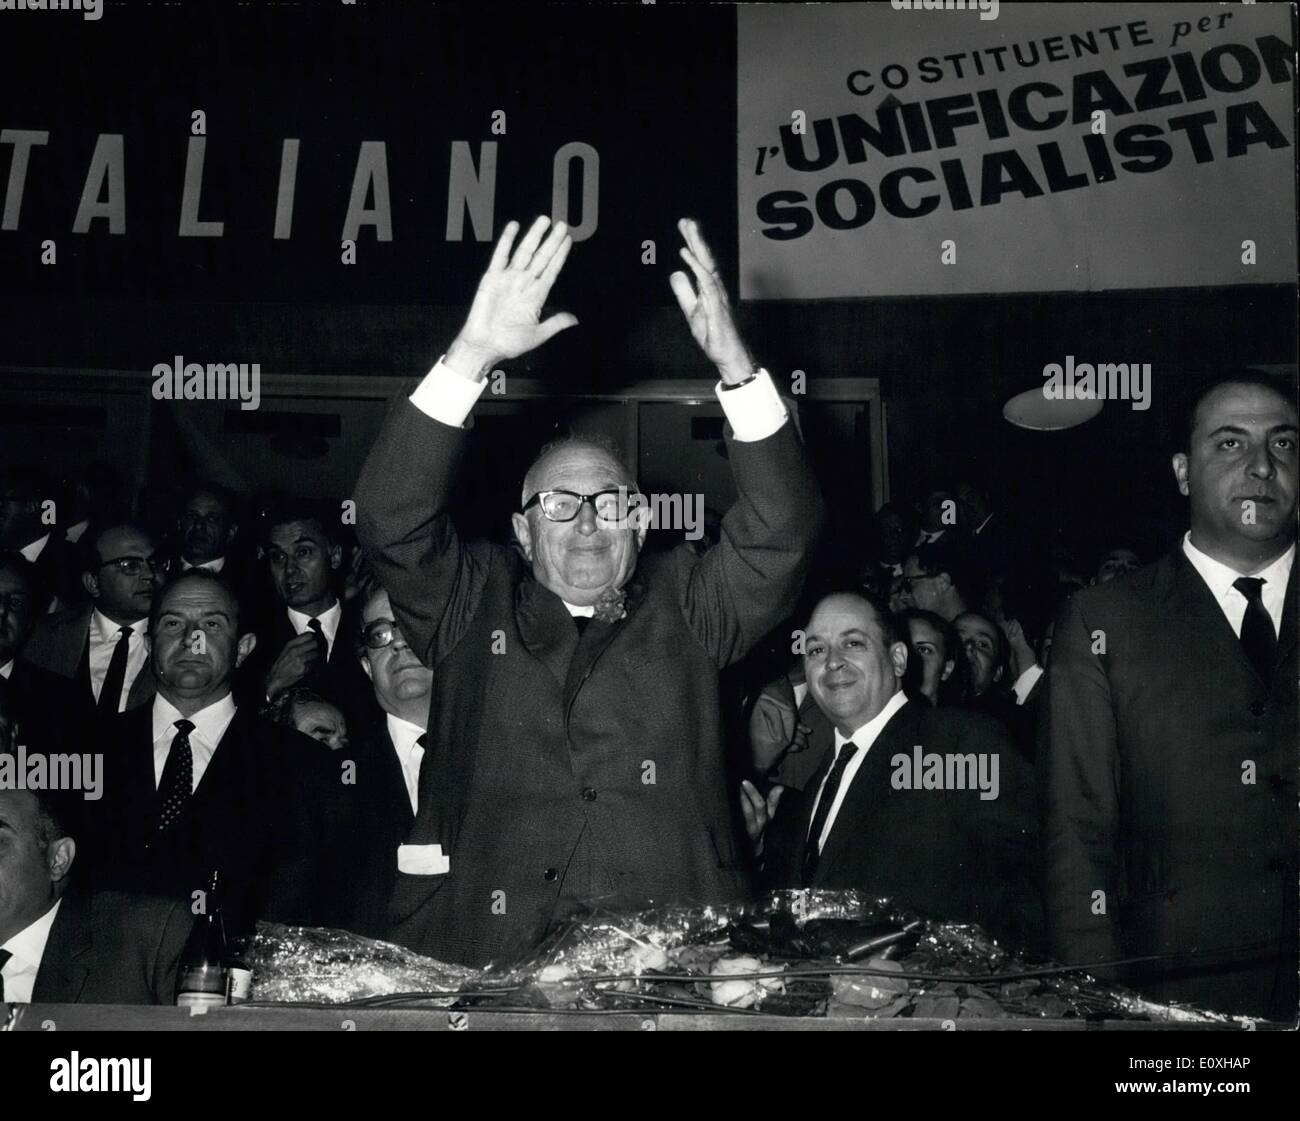 Oct. 10, 1966 - The Italian Socialist Parties celebrated today, at the Sport Palace in Rome, the historic merger of once rival parties into a single socialist bloc, large enough to challenge both Catholics and Communist The Vice Premier Pietro NENNI was cheered President of the New United Socialist Party The merger, me much-needed simplification, ends 19 year of often bitter rivalry between the two parties. OPS . Pietro MEN' cheered President of tree Few Unit,i Socialist Party. Stock Photo